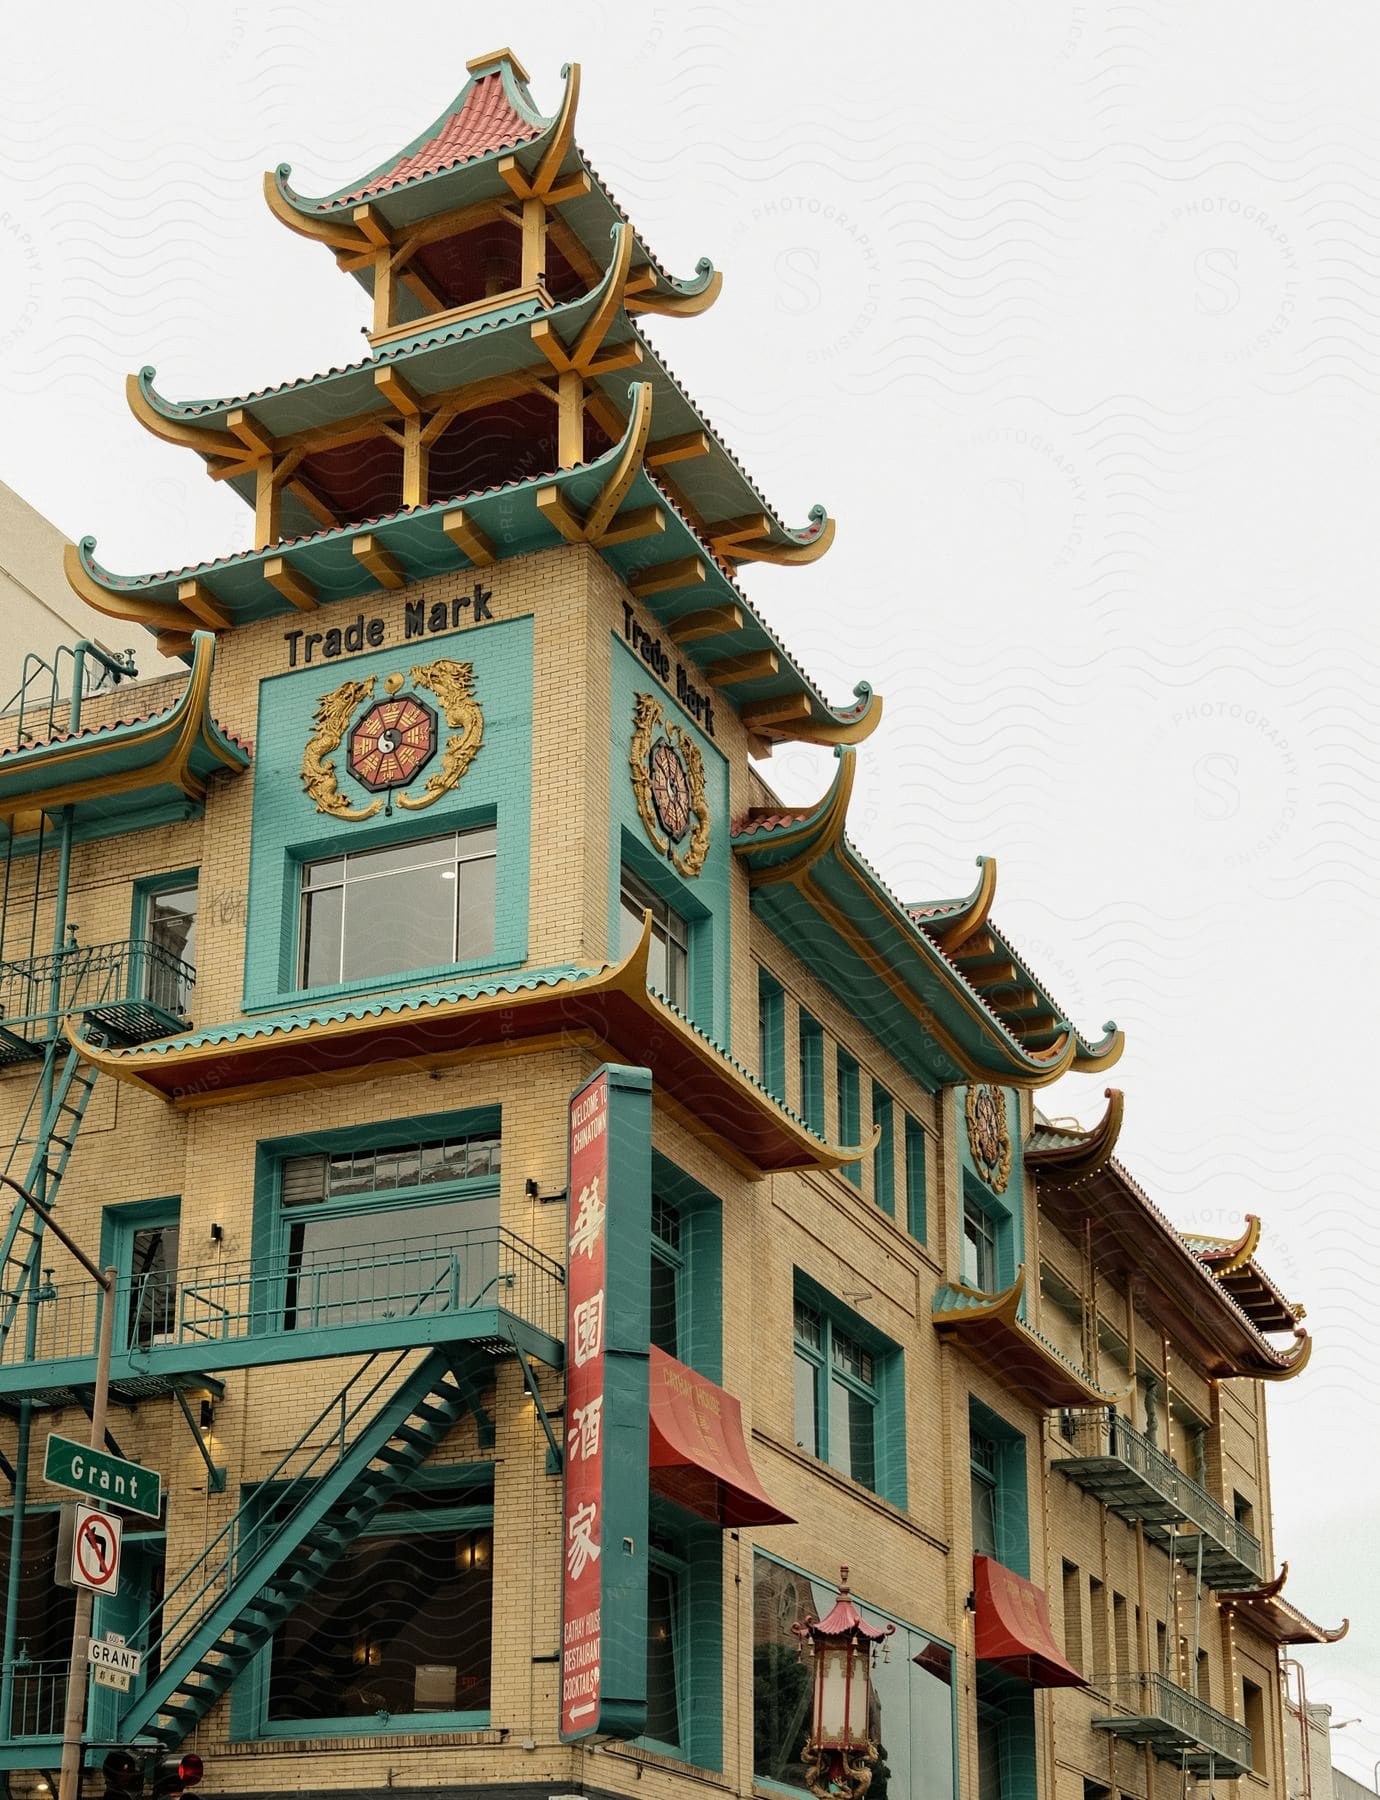 An Asian-style building outdoors on a cloudy day